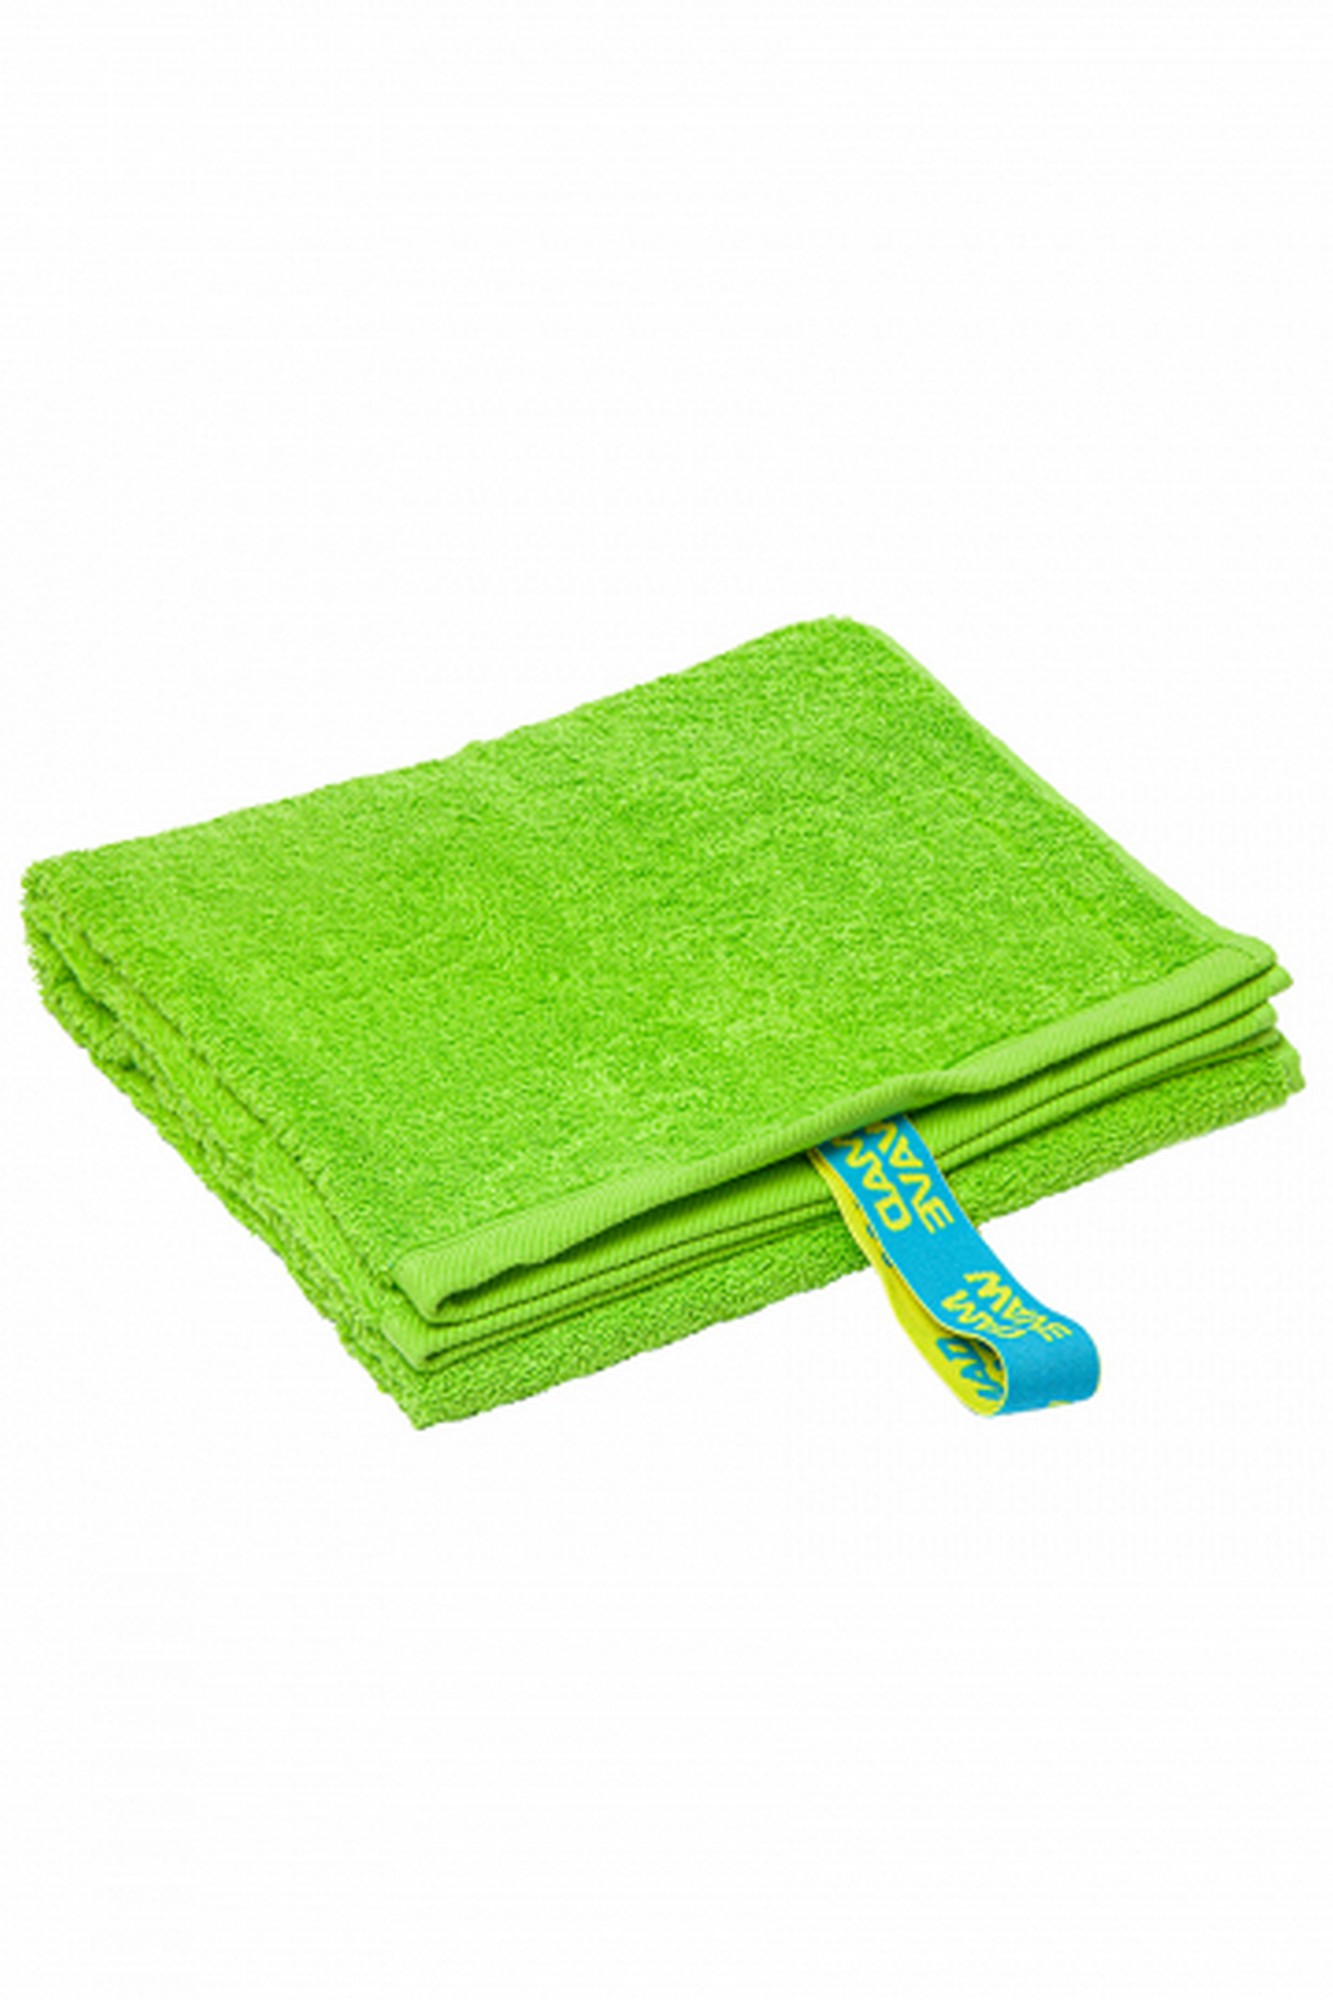  Mad Wave Cotton Sort Terry Towel M0762 01 2 10W 